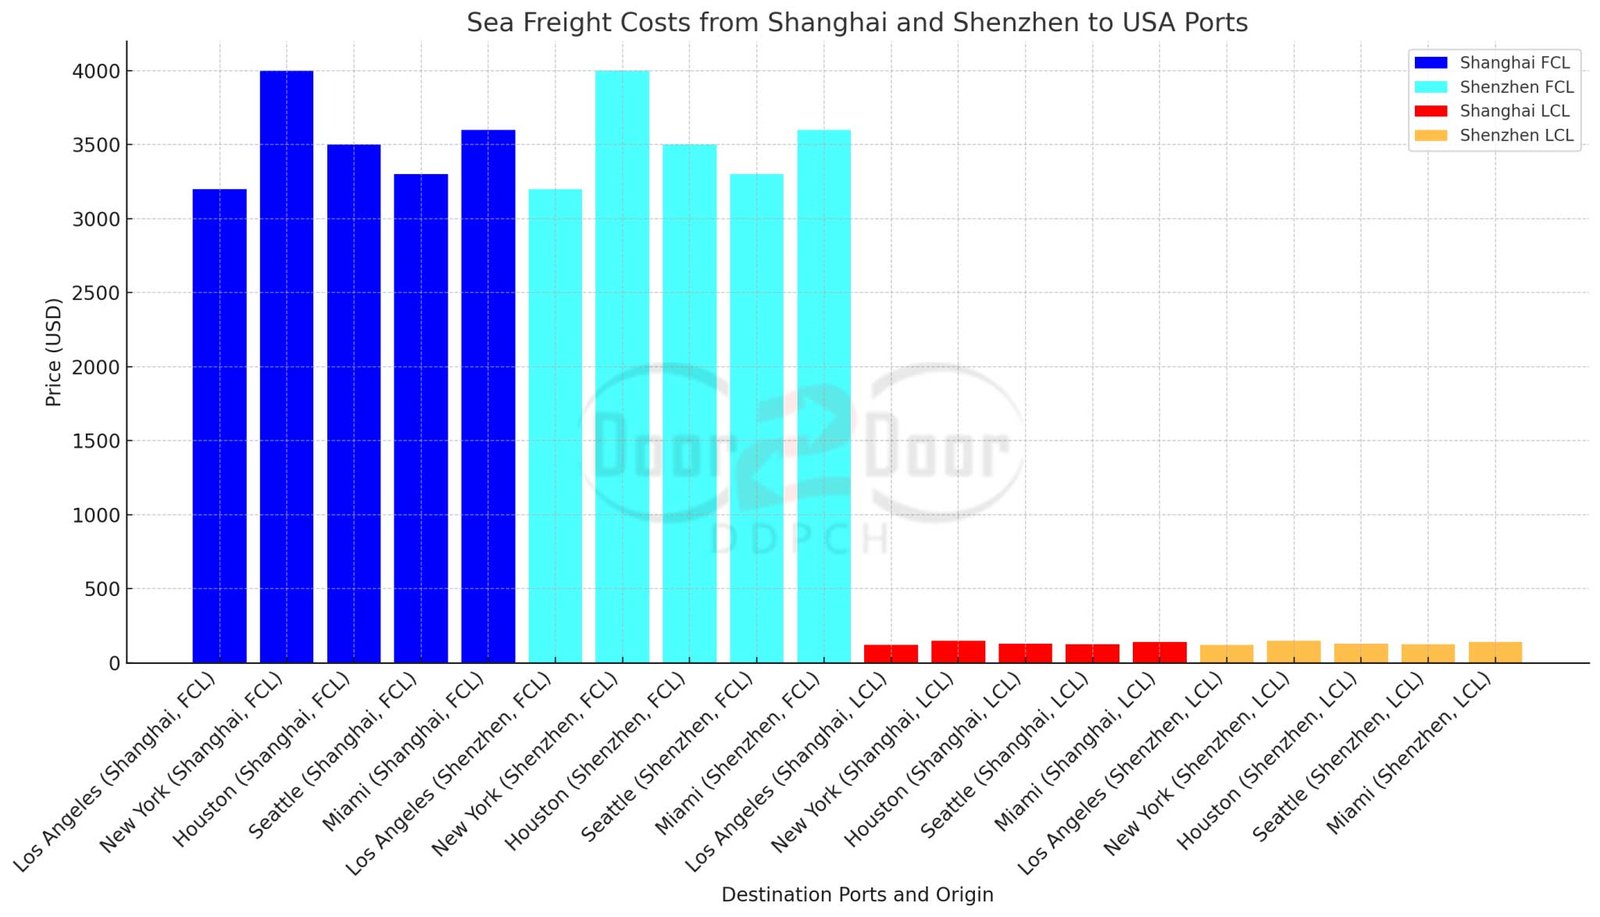 Sea freight cost from China to USA